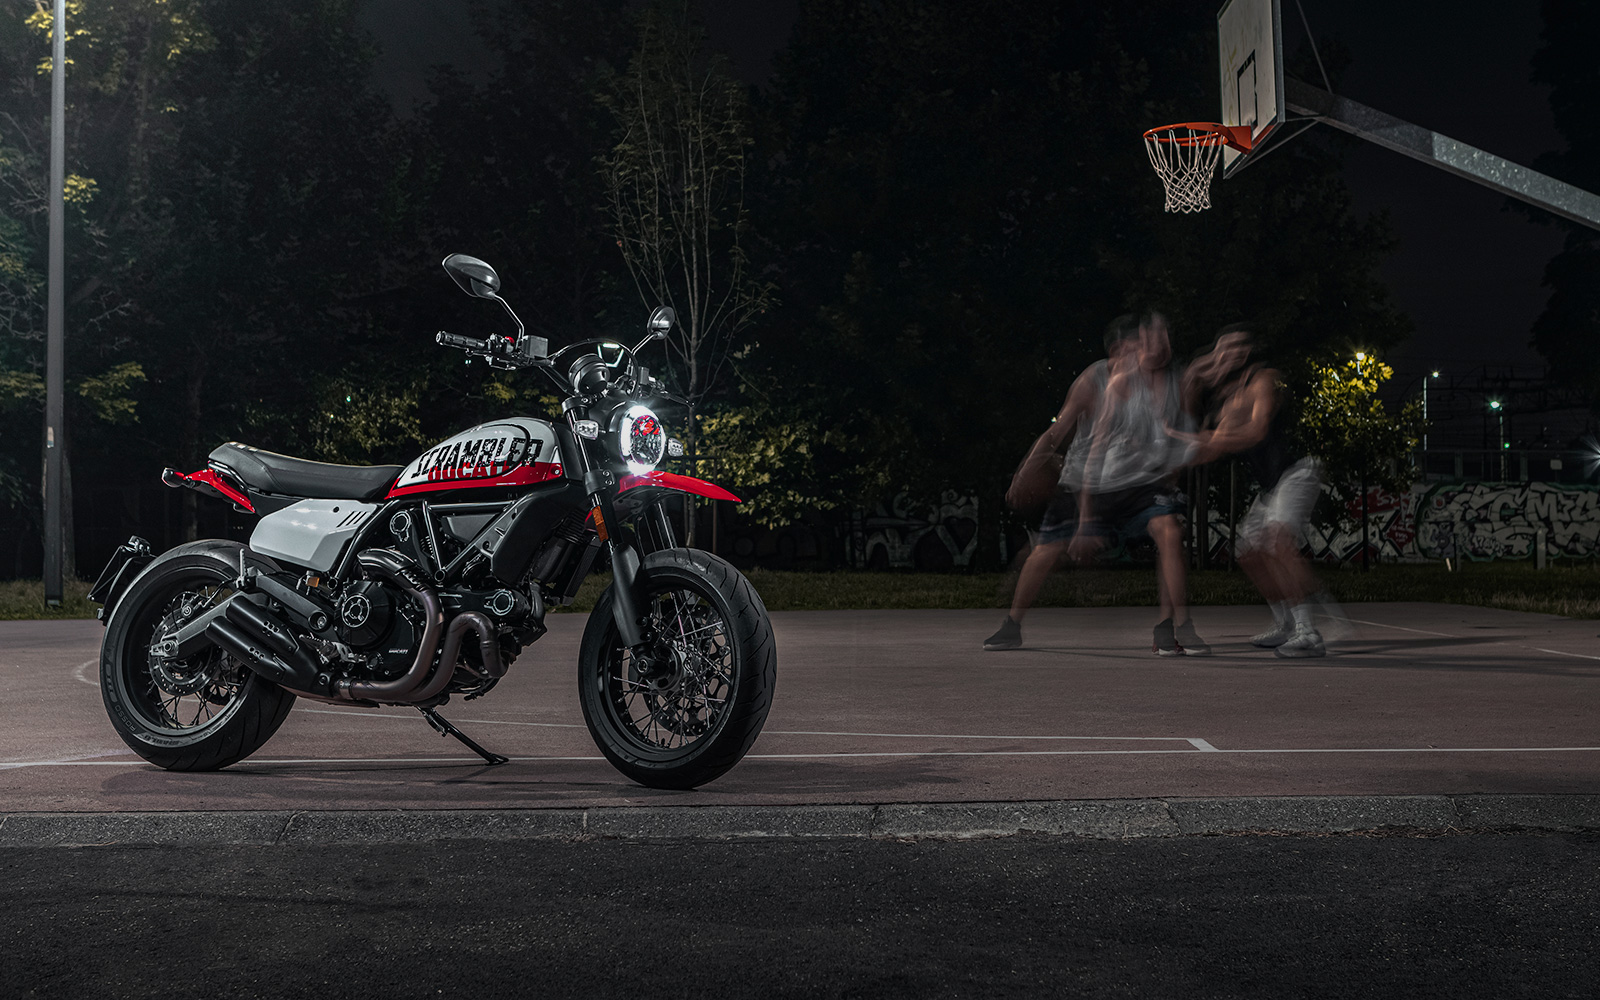 A view of the Scrambler Ducati Urban Motorcycle courtesy of Ducati's World Premiere